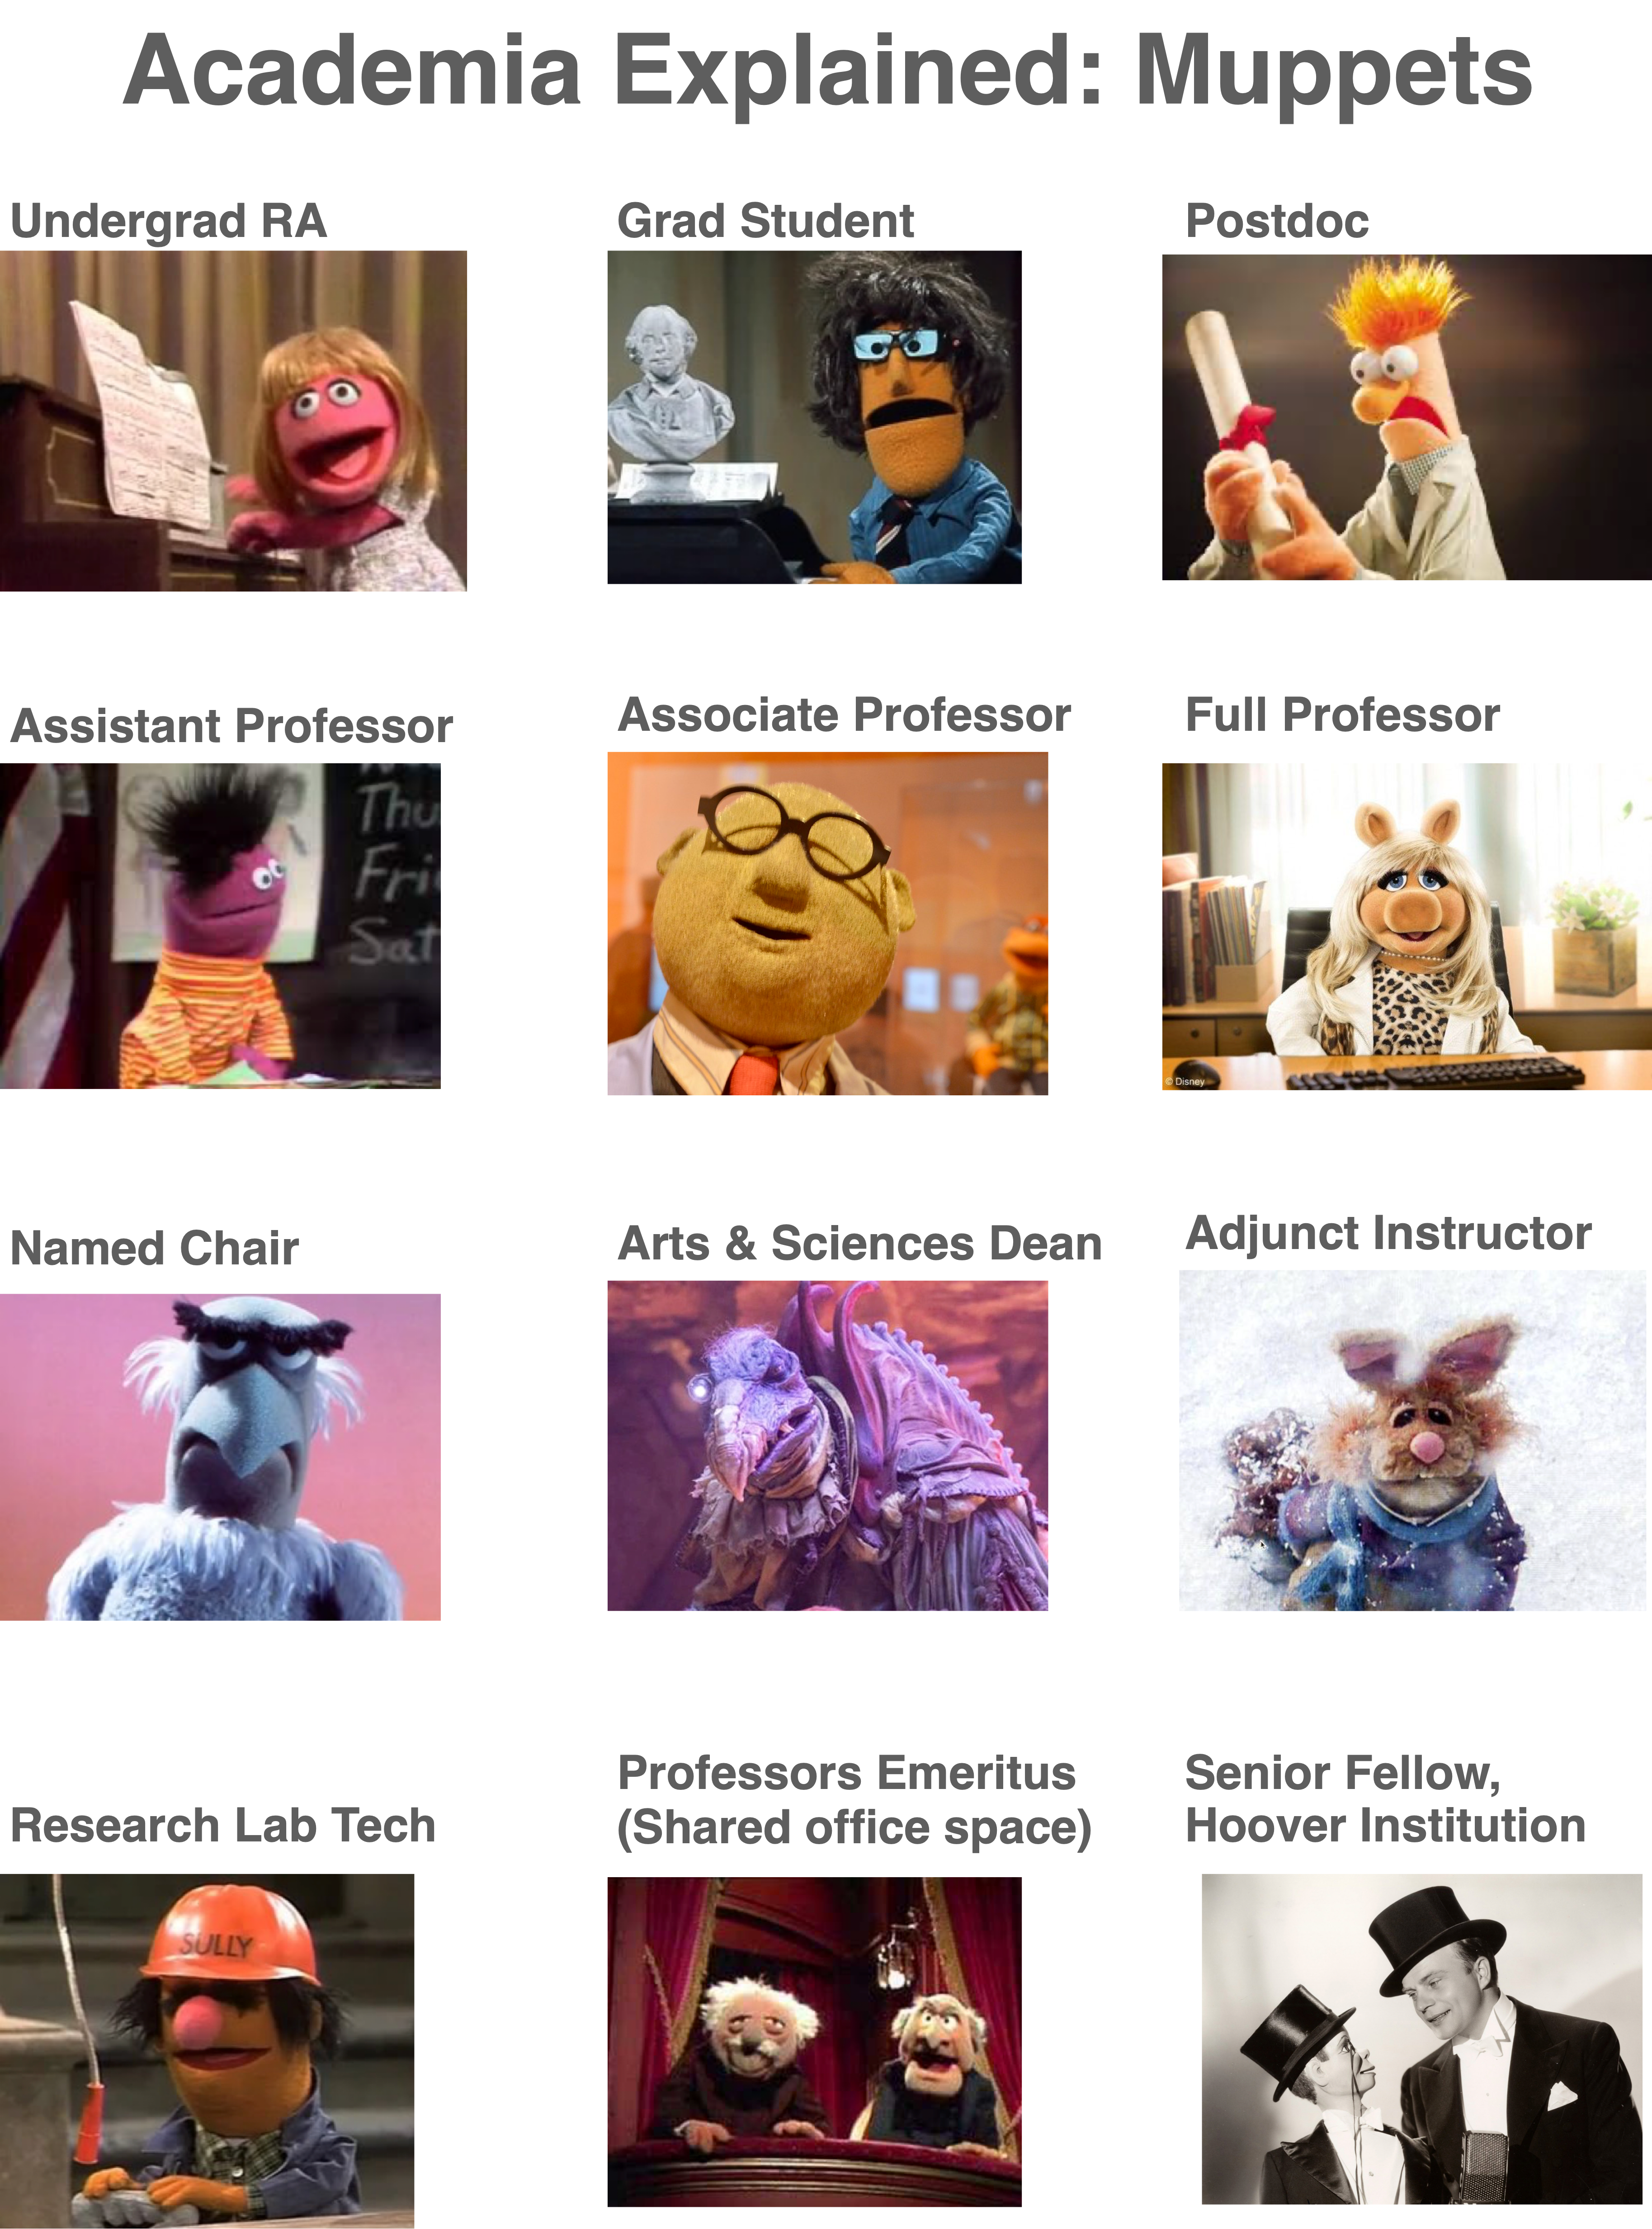 Muppets and Faculty